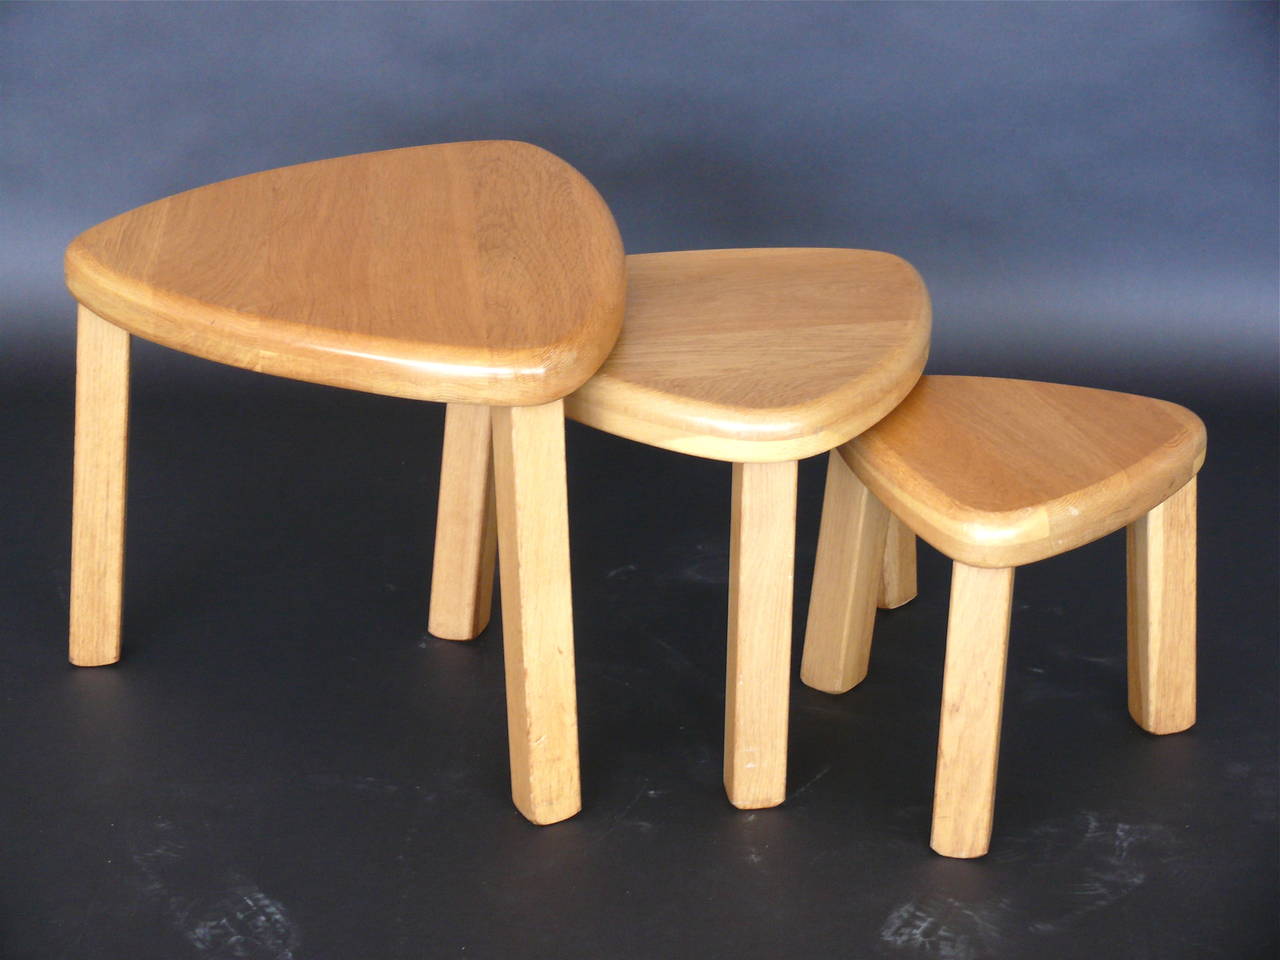 Sculptural set of three nesting tables by Pierre Chapo. French white oak tables look great individually as well. Sold as a set of three. Excellent vintage condition.